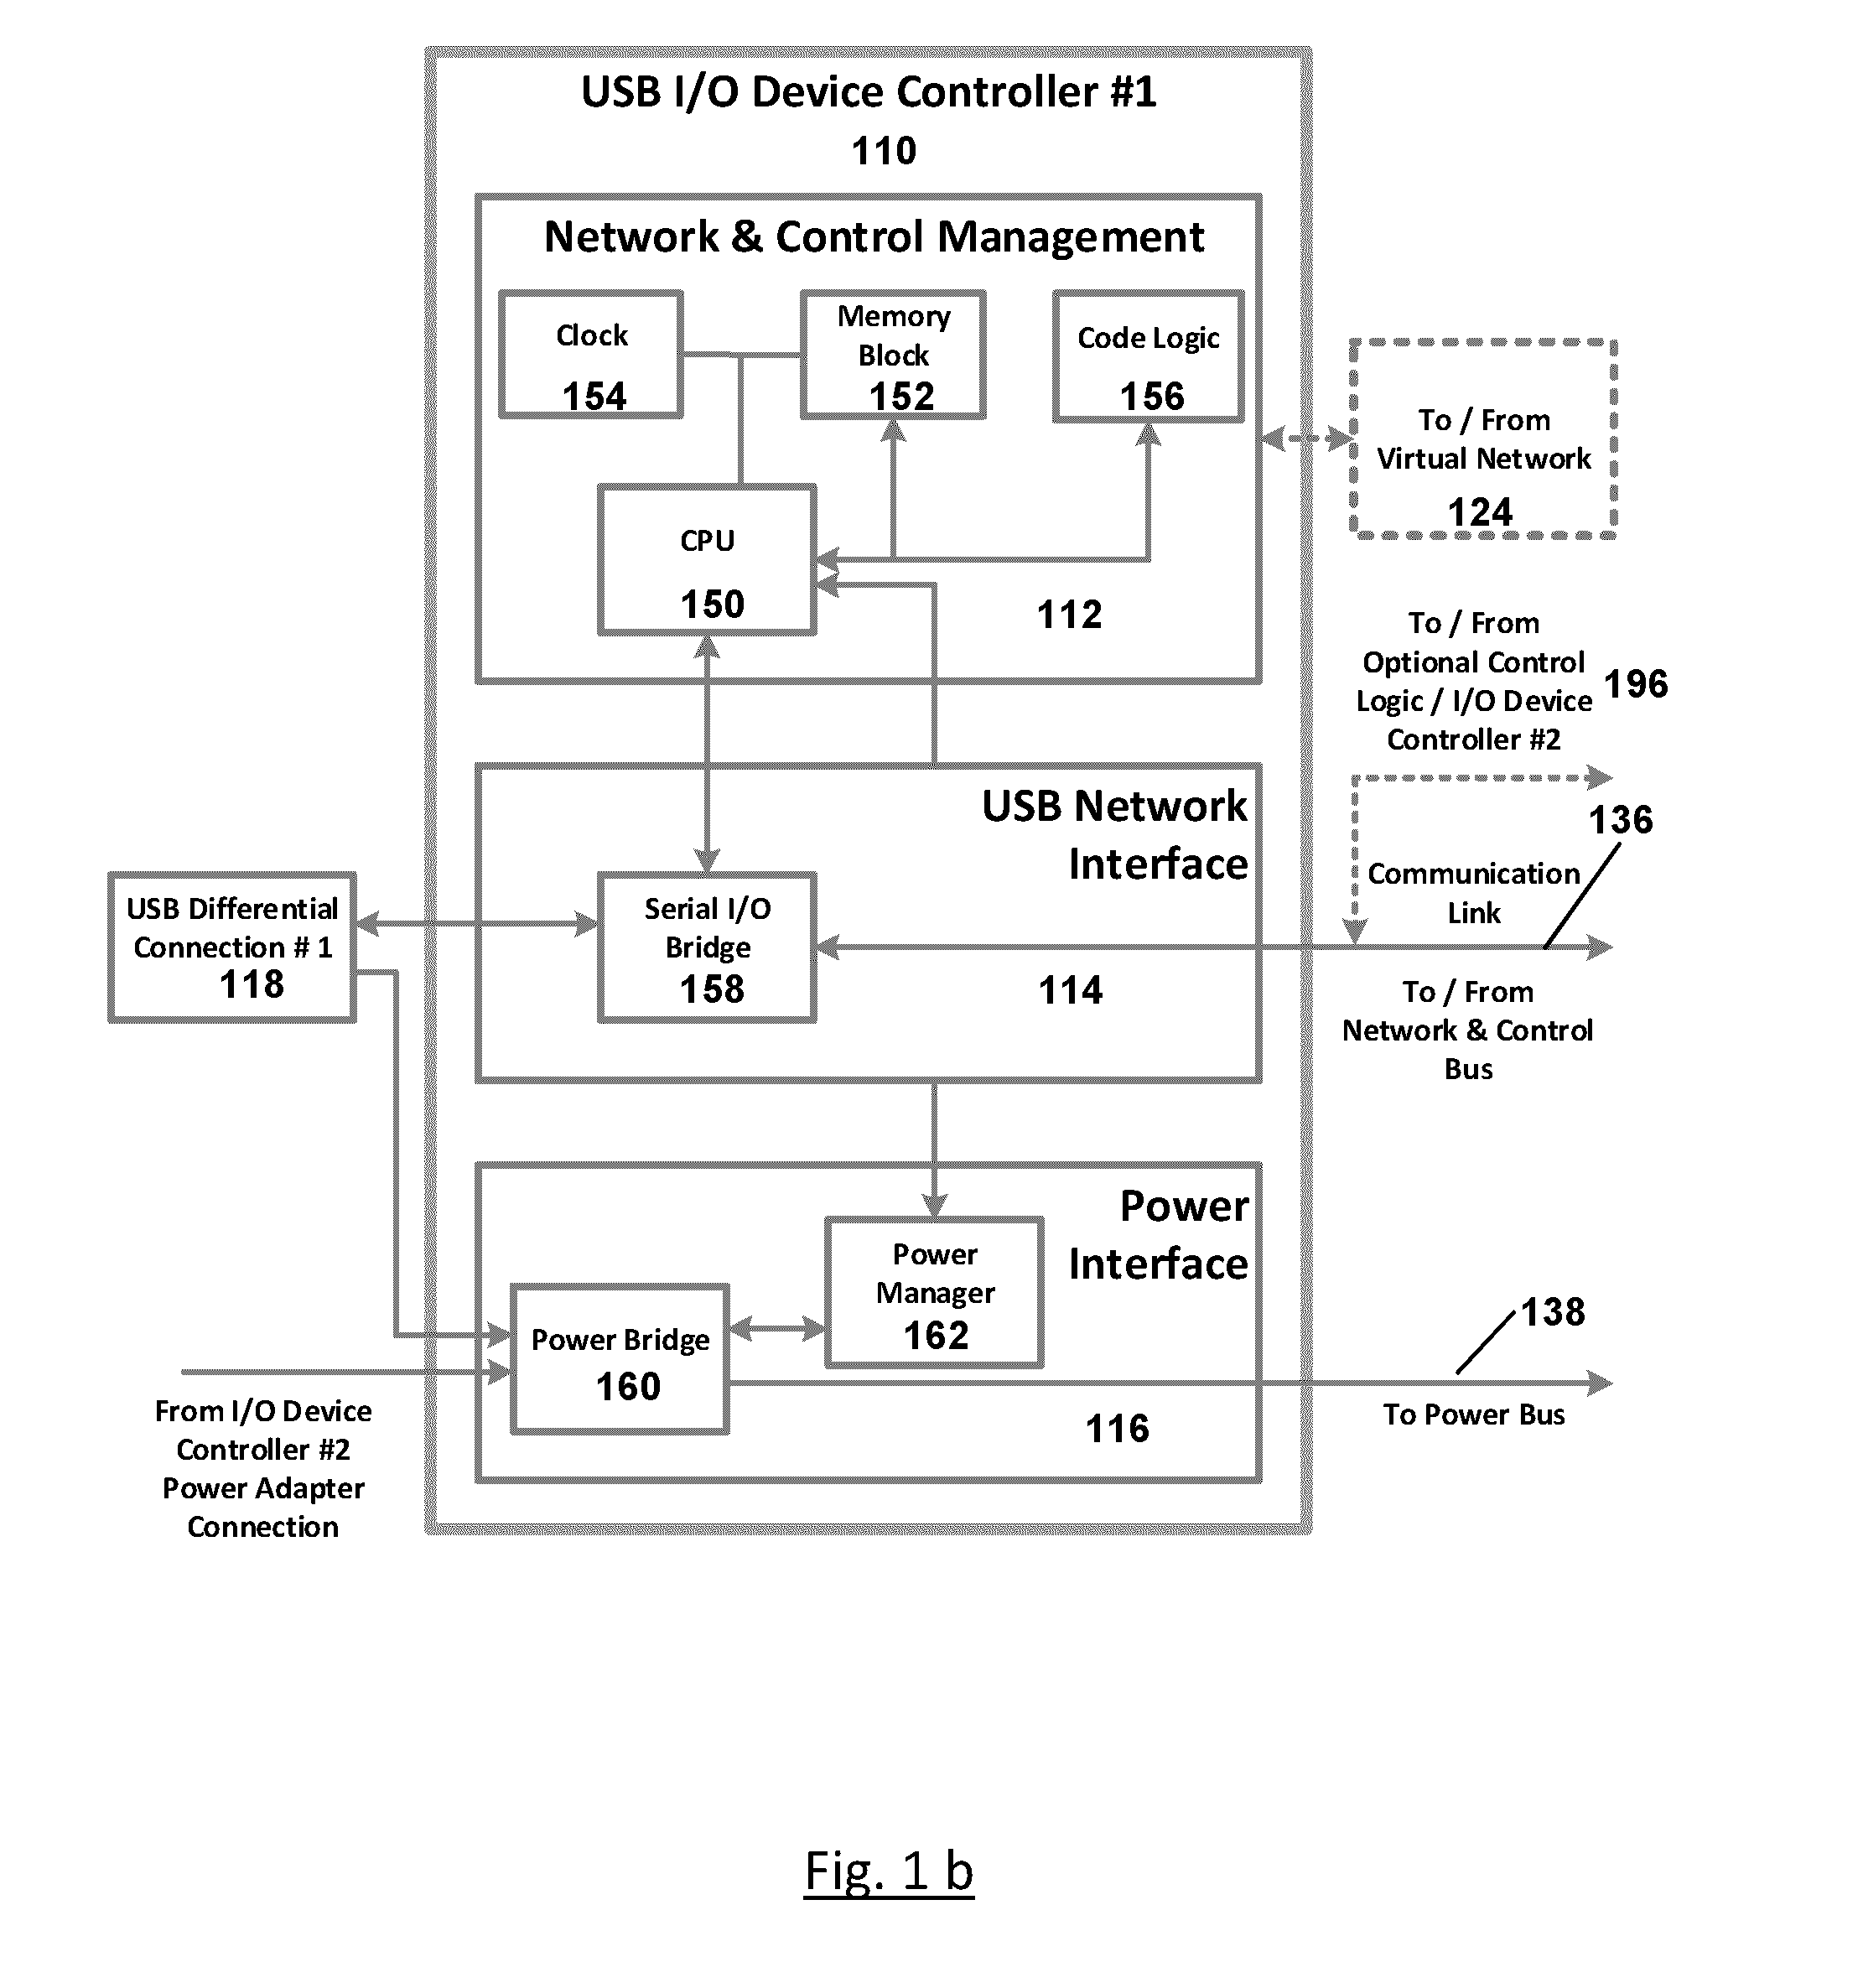 Link system for establishing high speed network communications and file transfer between hosts using I/O device links